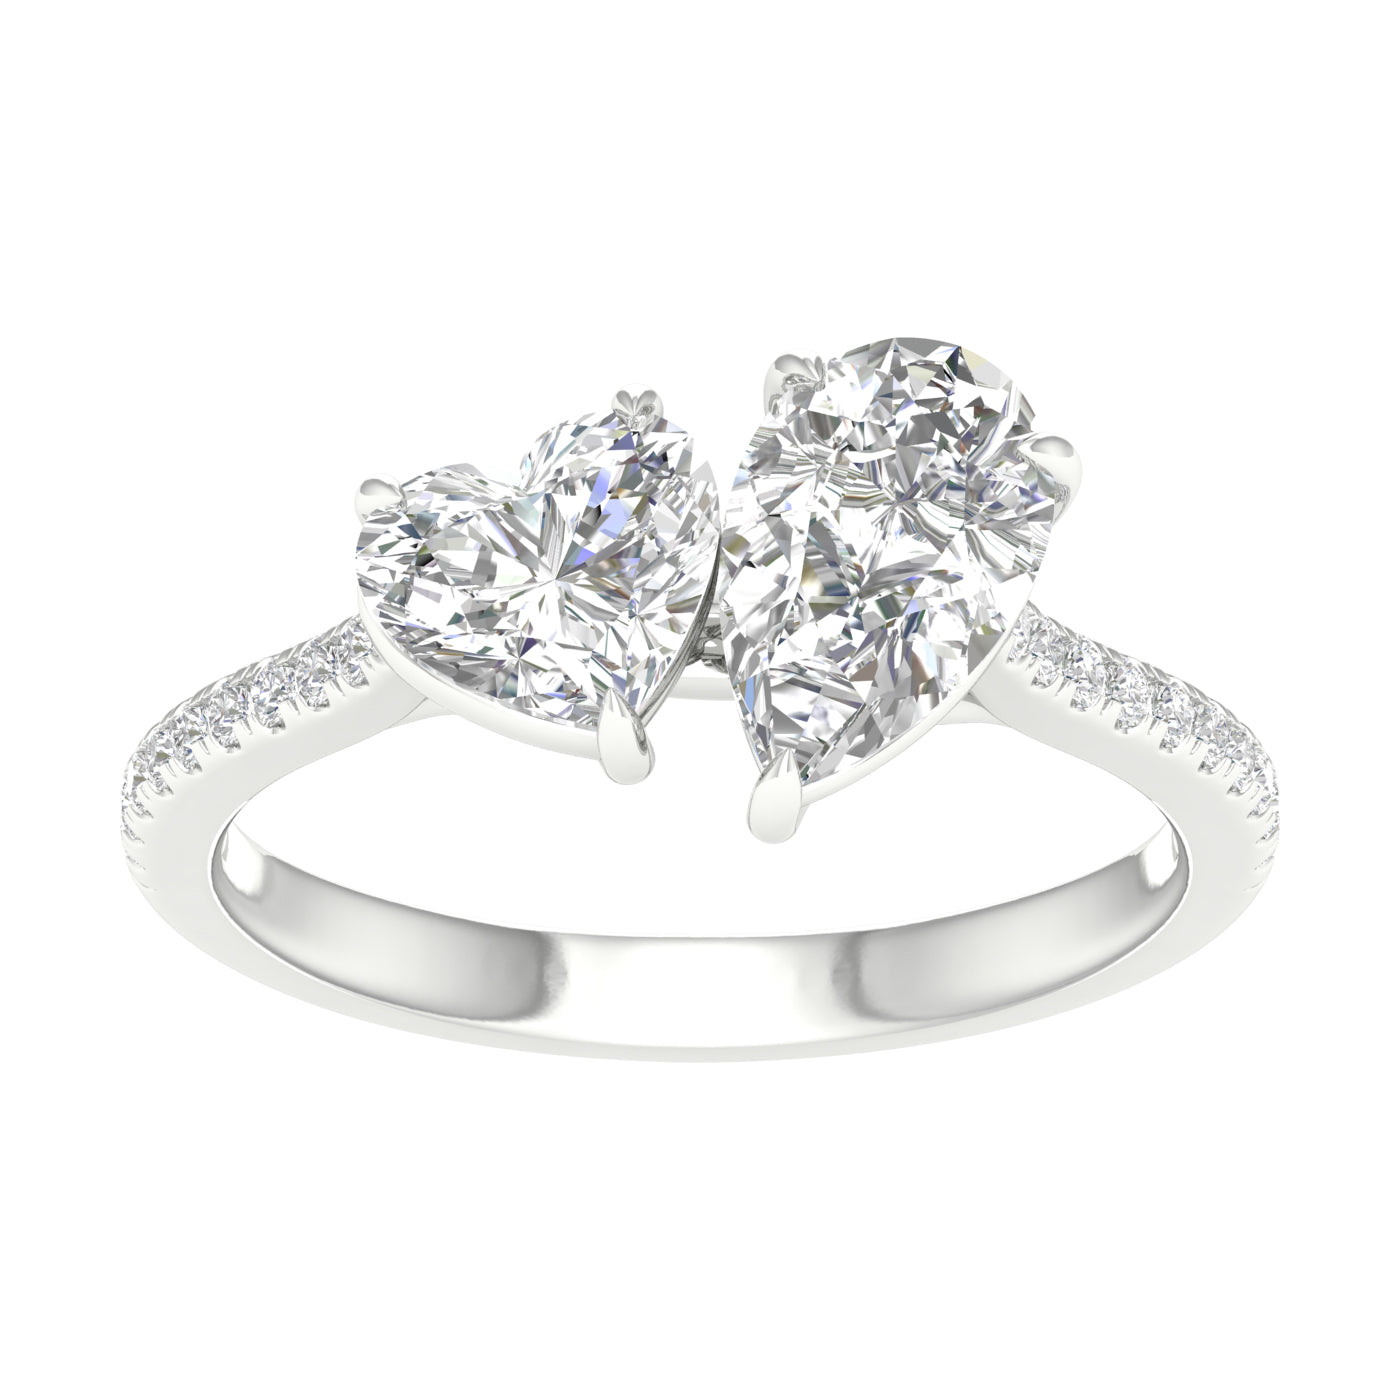 Atmos Heart Pear Two Stone Diamond Ring_Product Angle_2 1/6 Ct. - 1